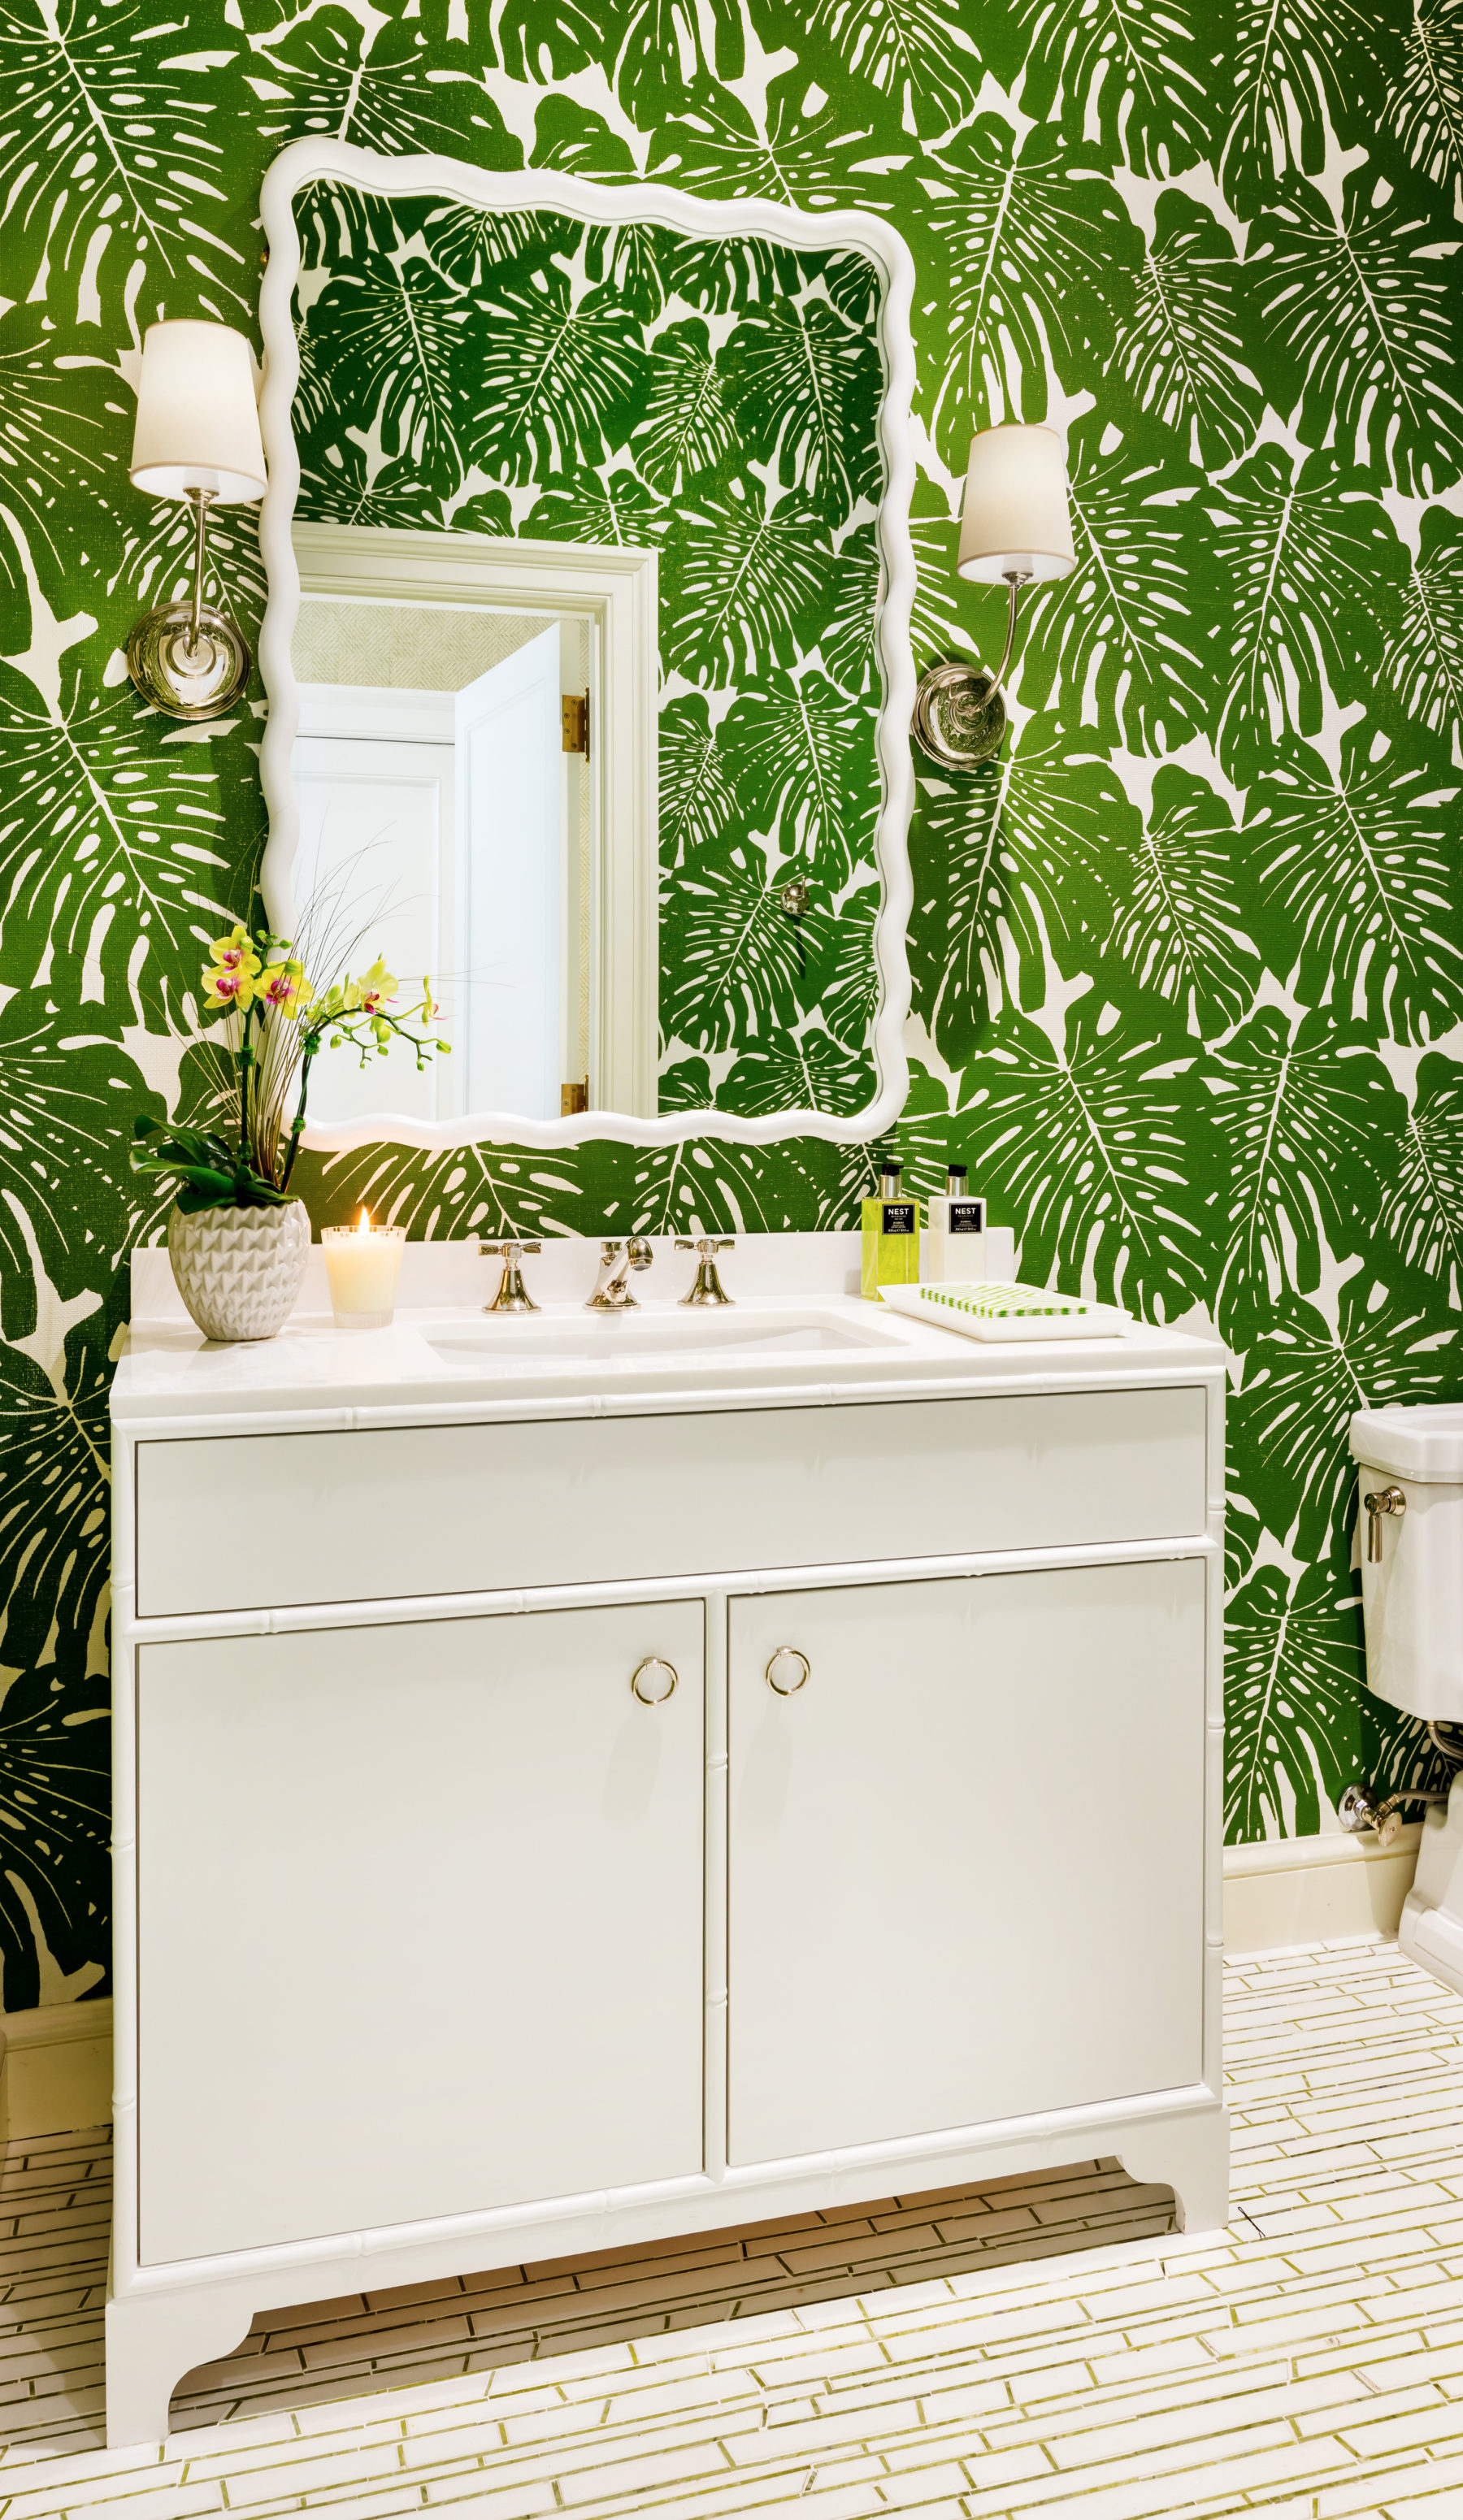 McCann Design Group Office Bathroom with palm wallpaper